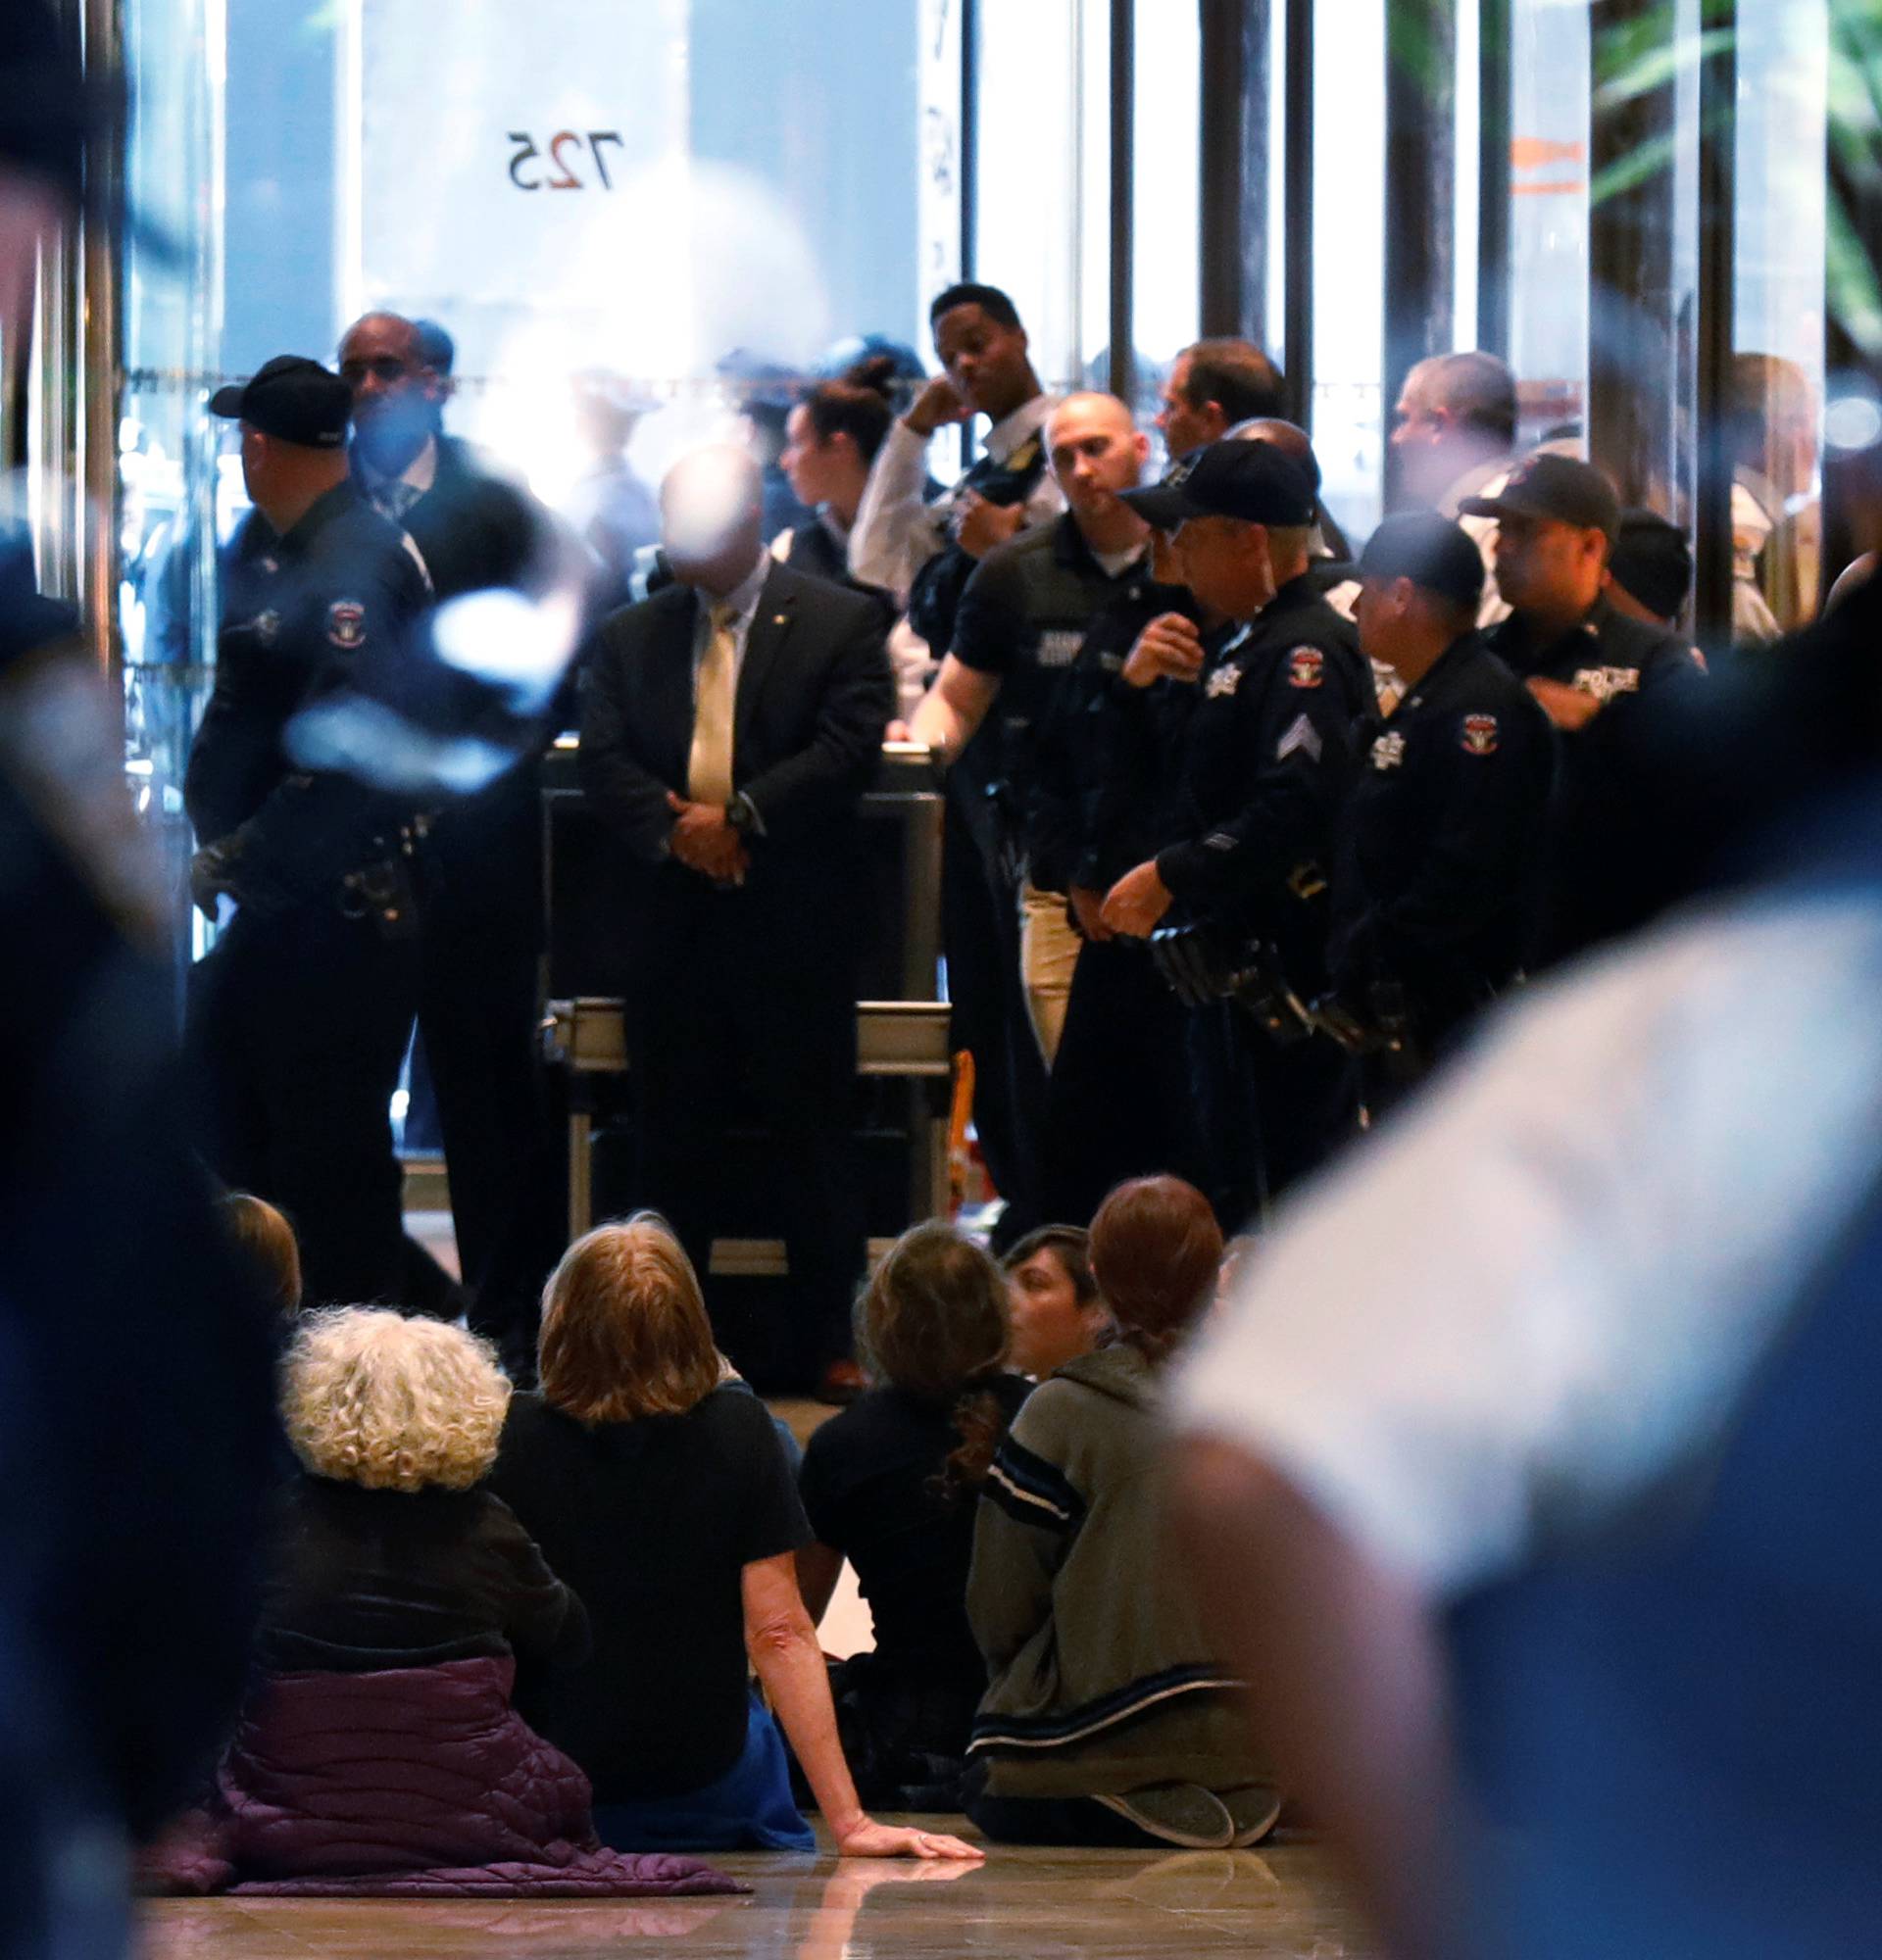 Protestors sit down in the lobby of Trump Tower as New York City Police officers (NYPD) prepare to make arrests in New York City